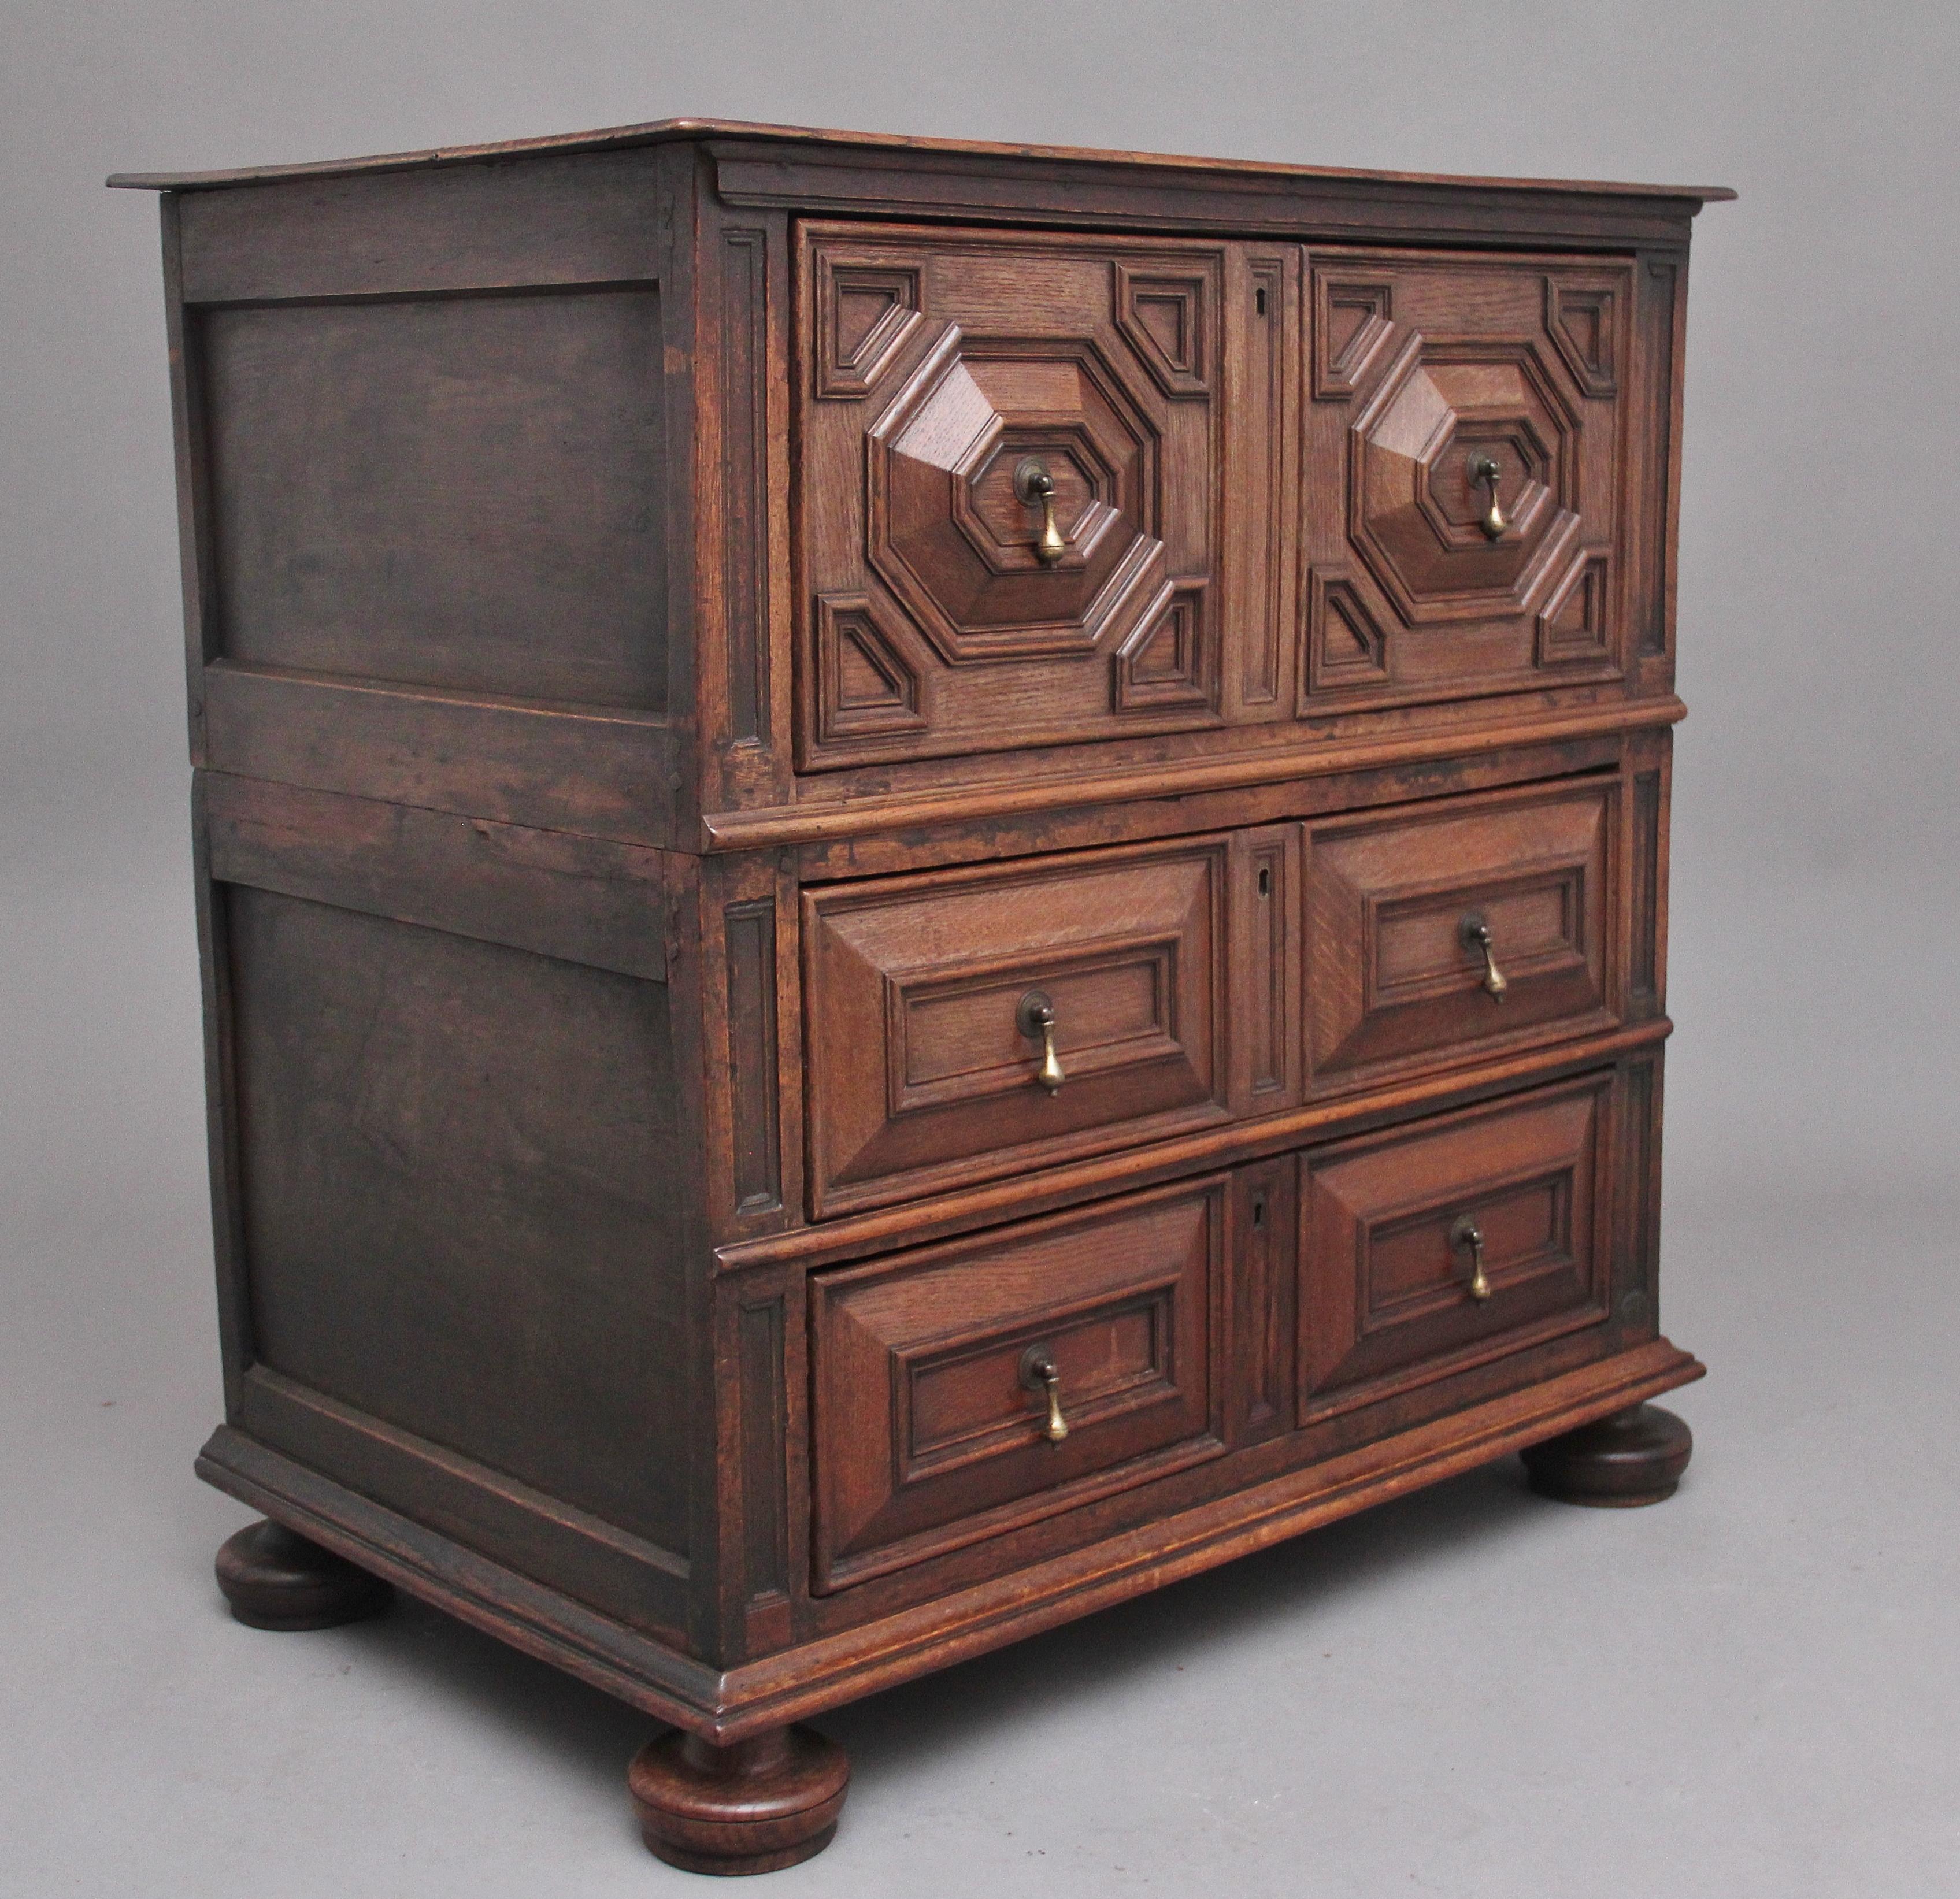 17th Century oak geometric chest of drawers of good proportions, the rectangular top above a deep moulded geometric drawer above two further geometric drawers, raised on squat bun feet. Circa 1670.